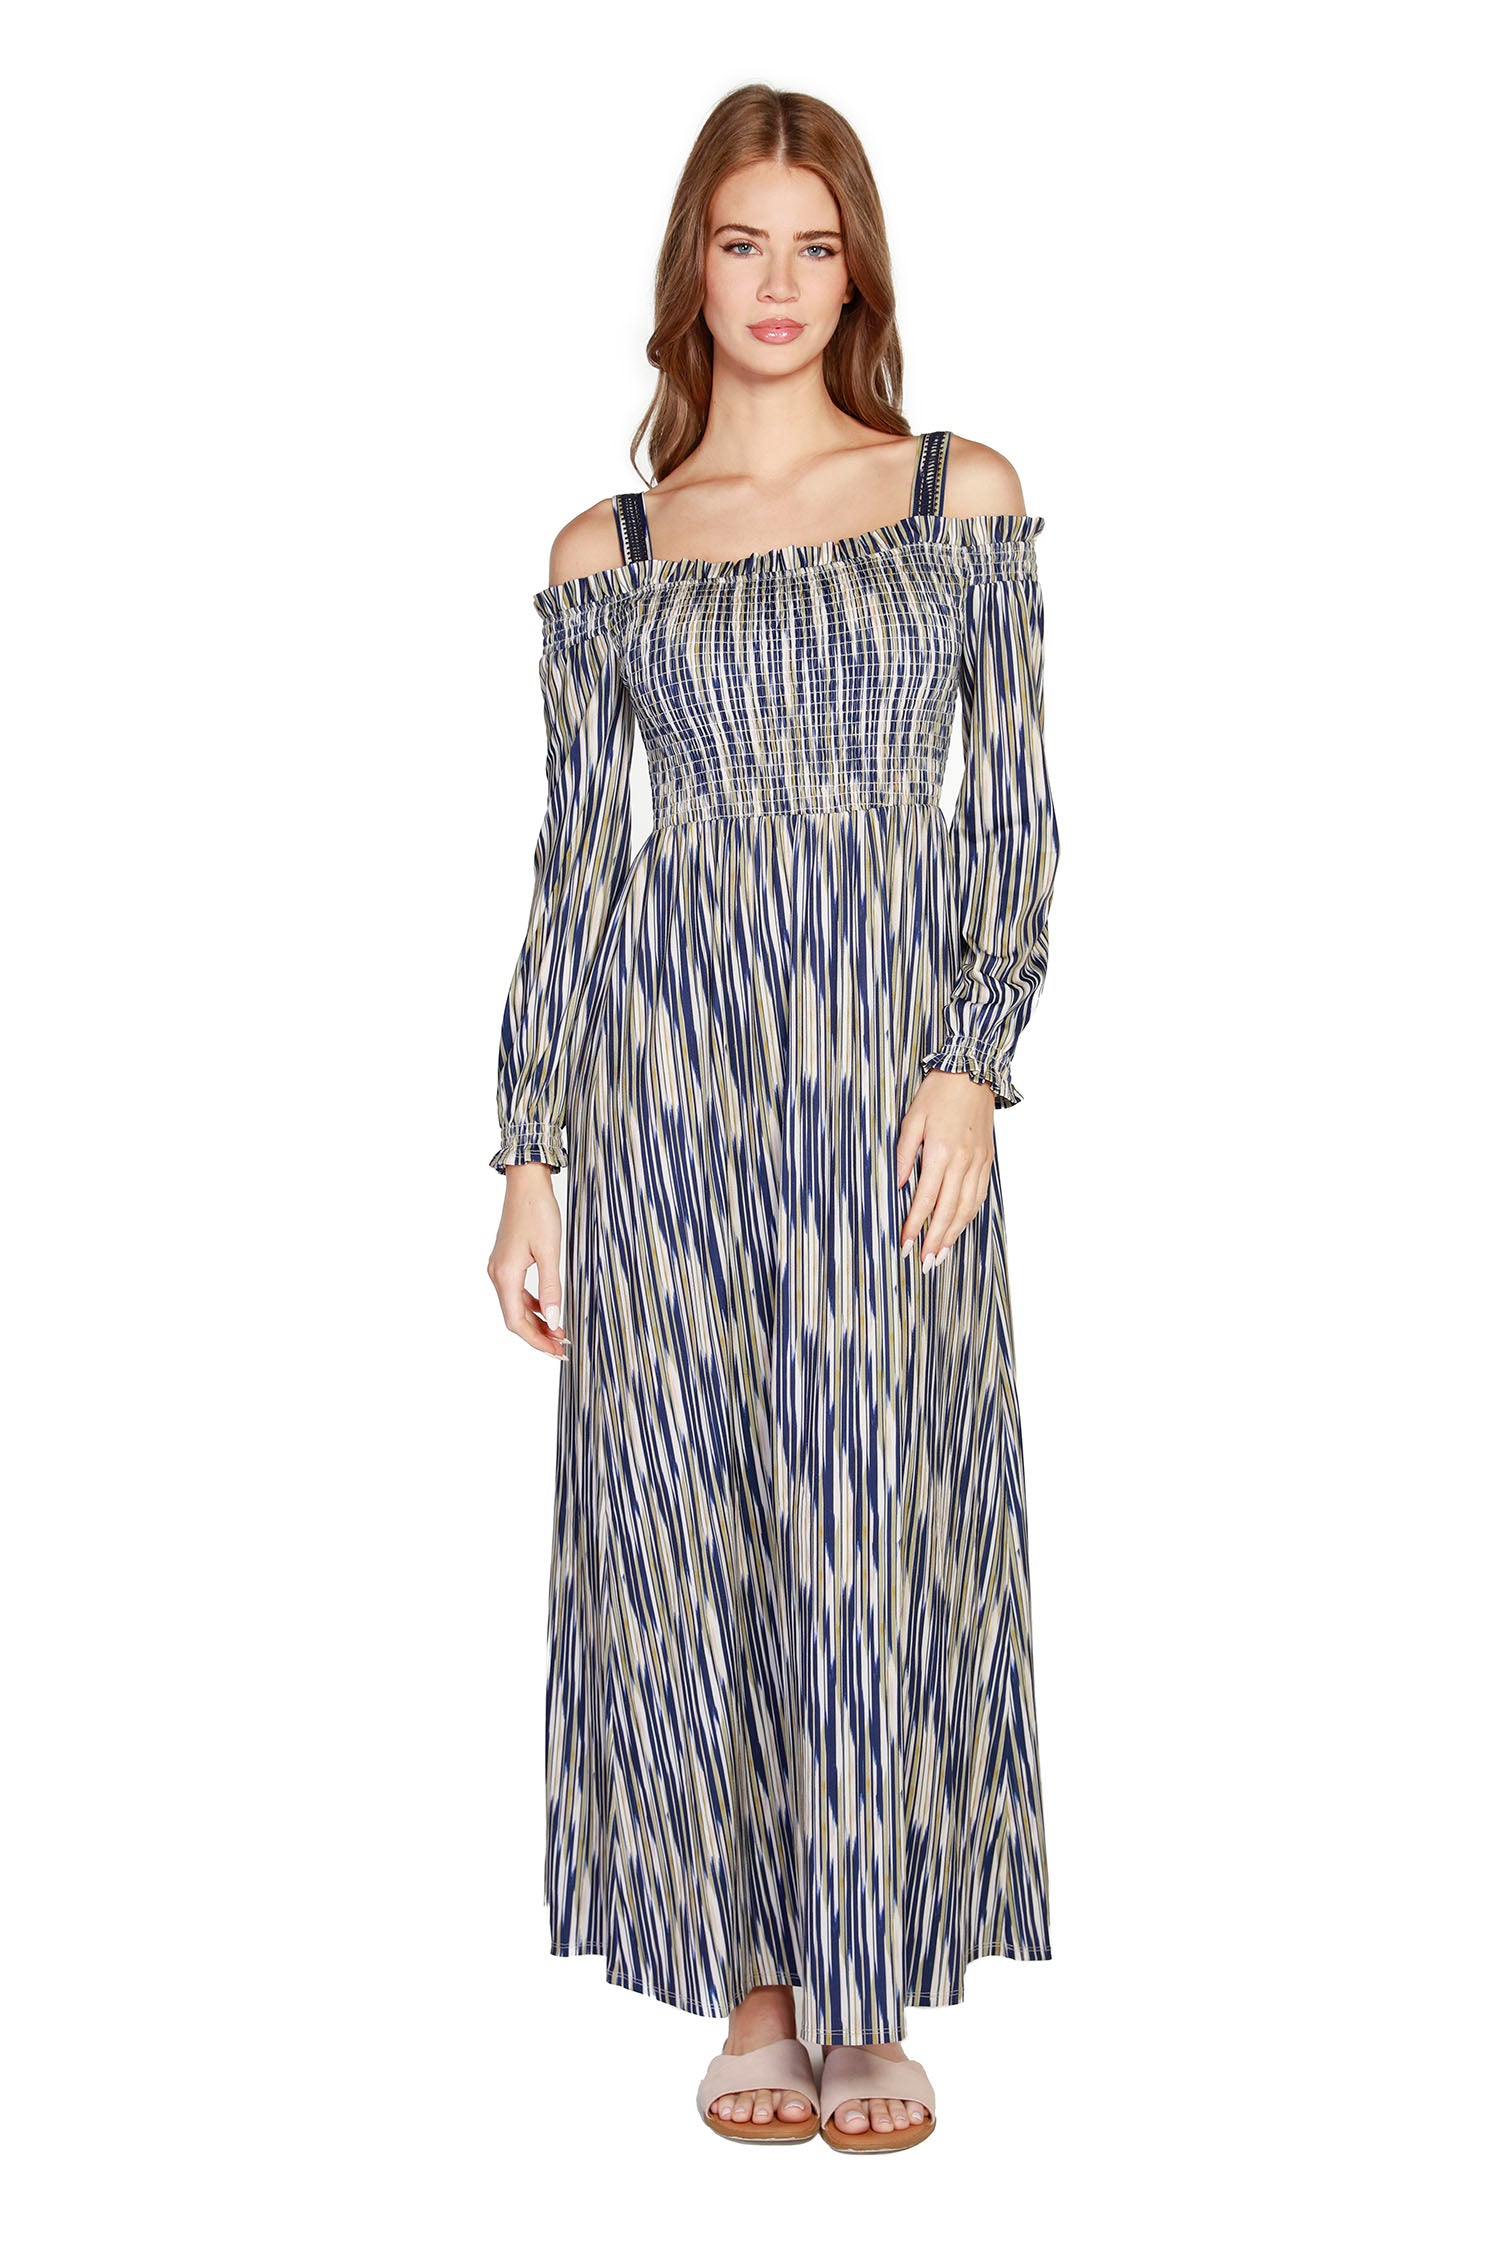 Women's Cold Shoulder Striped Knit Smocked Maxi Dress  |  LAST CALL